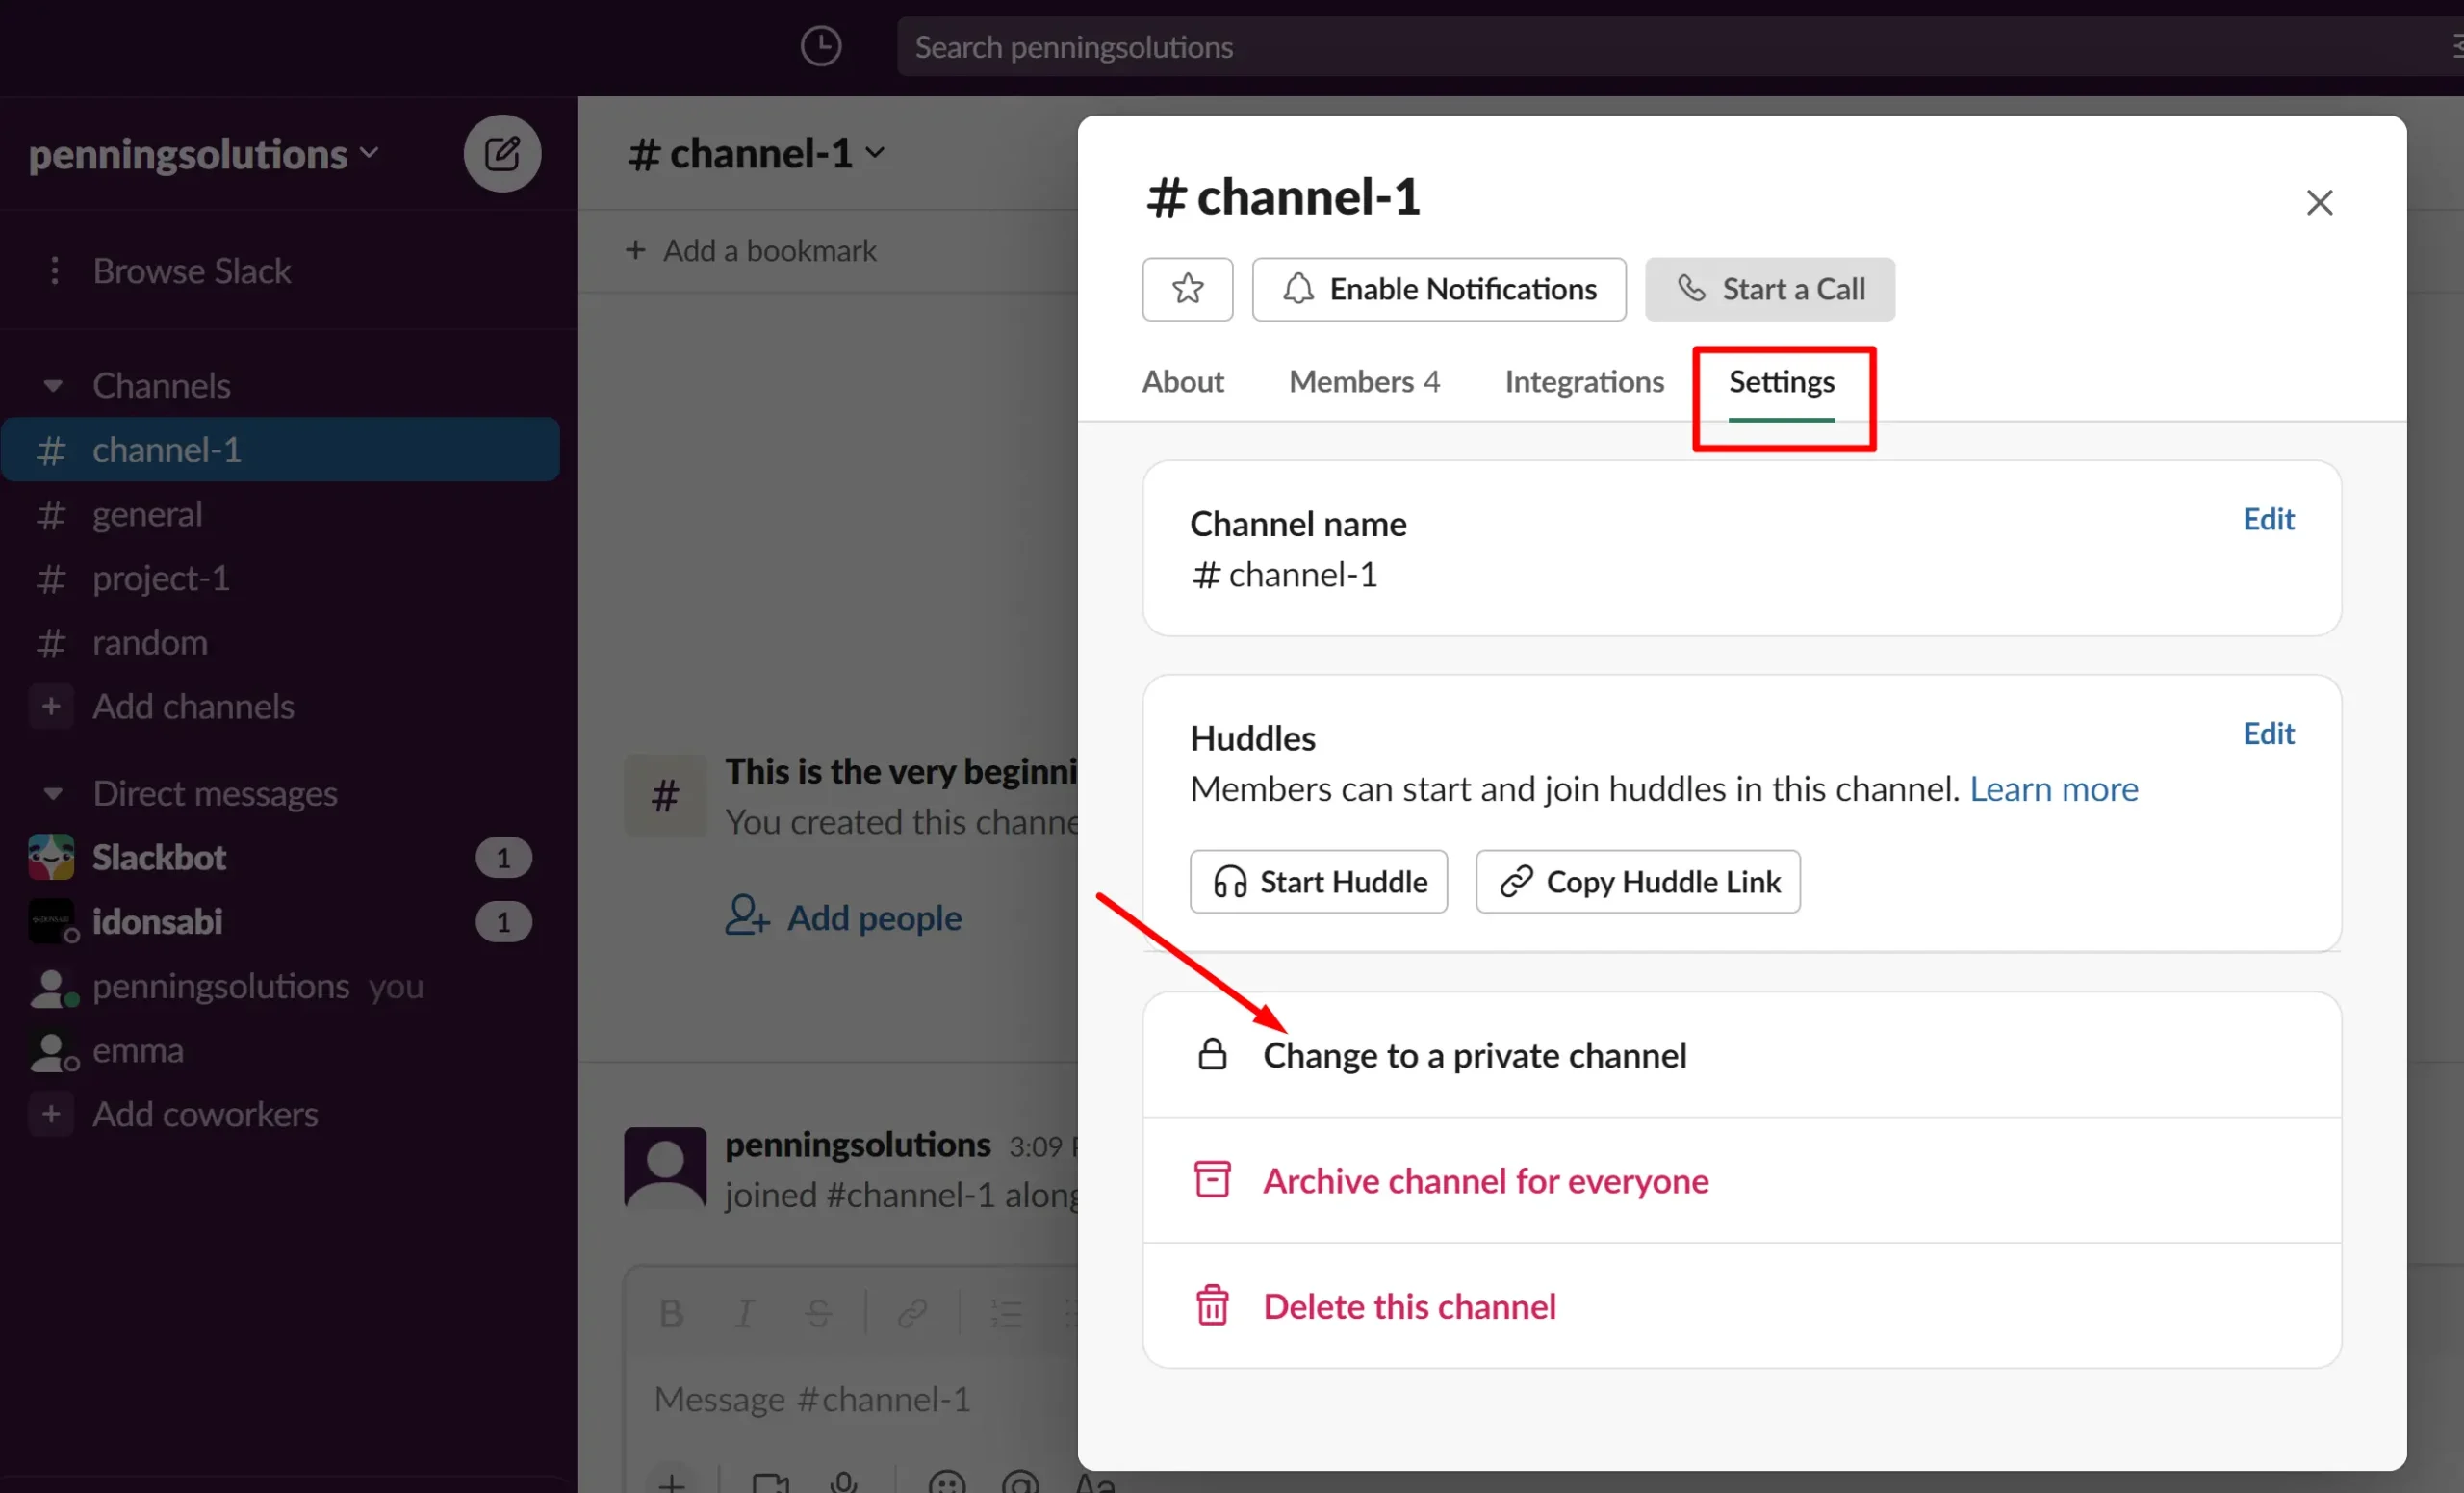 select 'Settings' and then Change to Private Channel